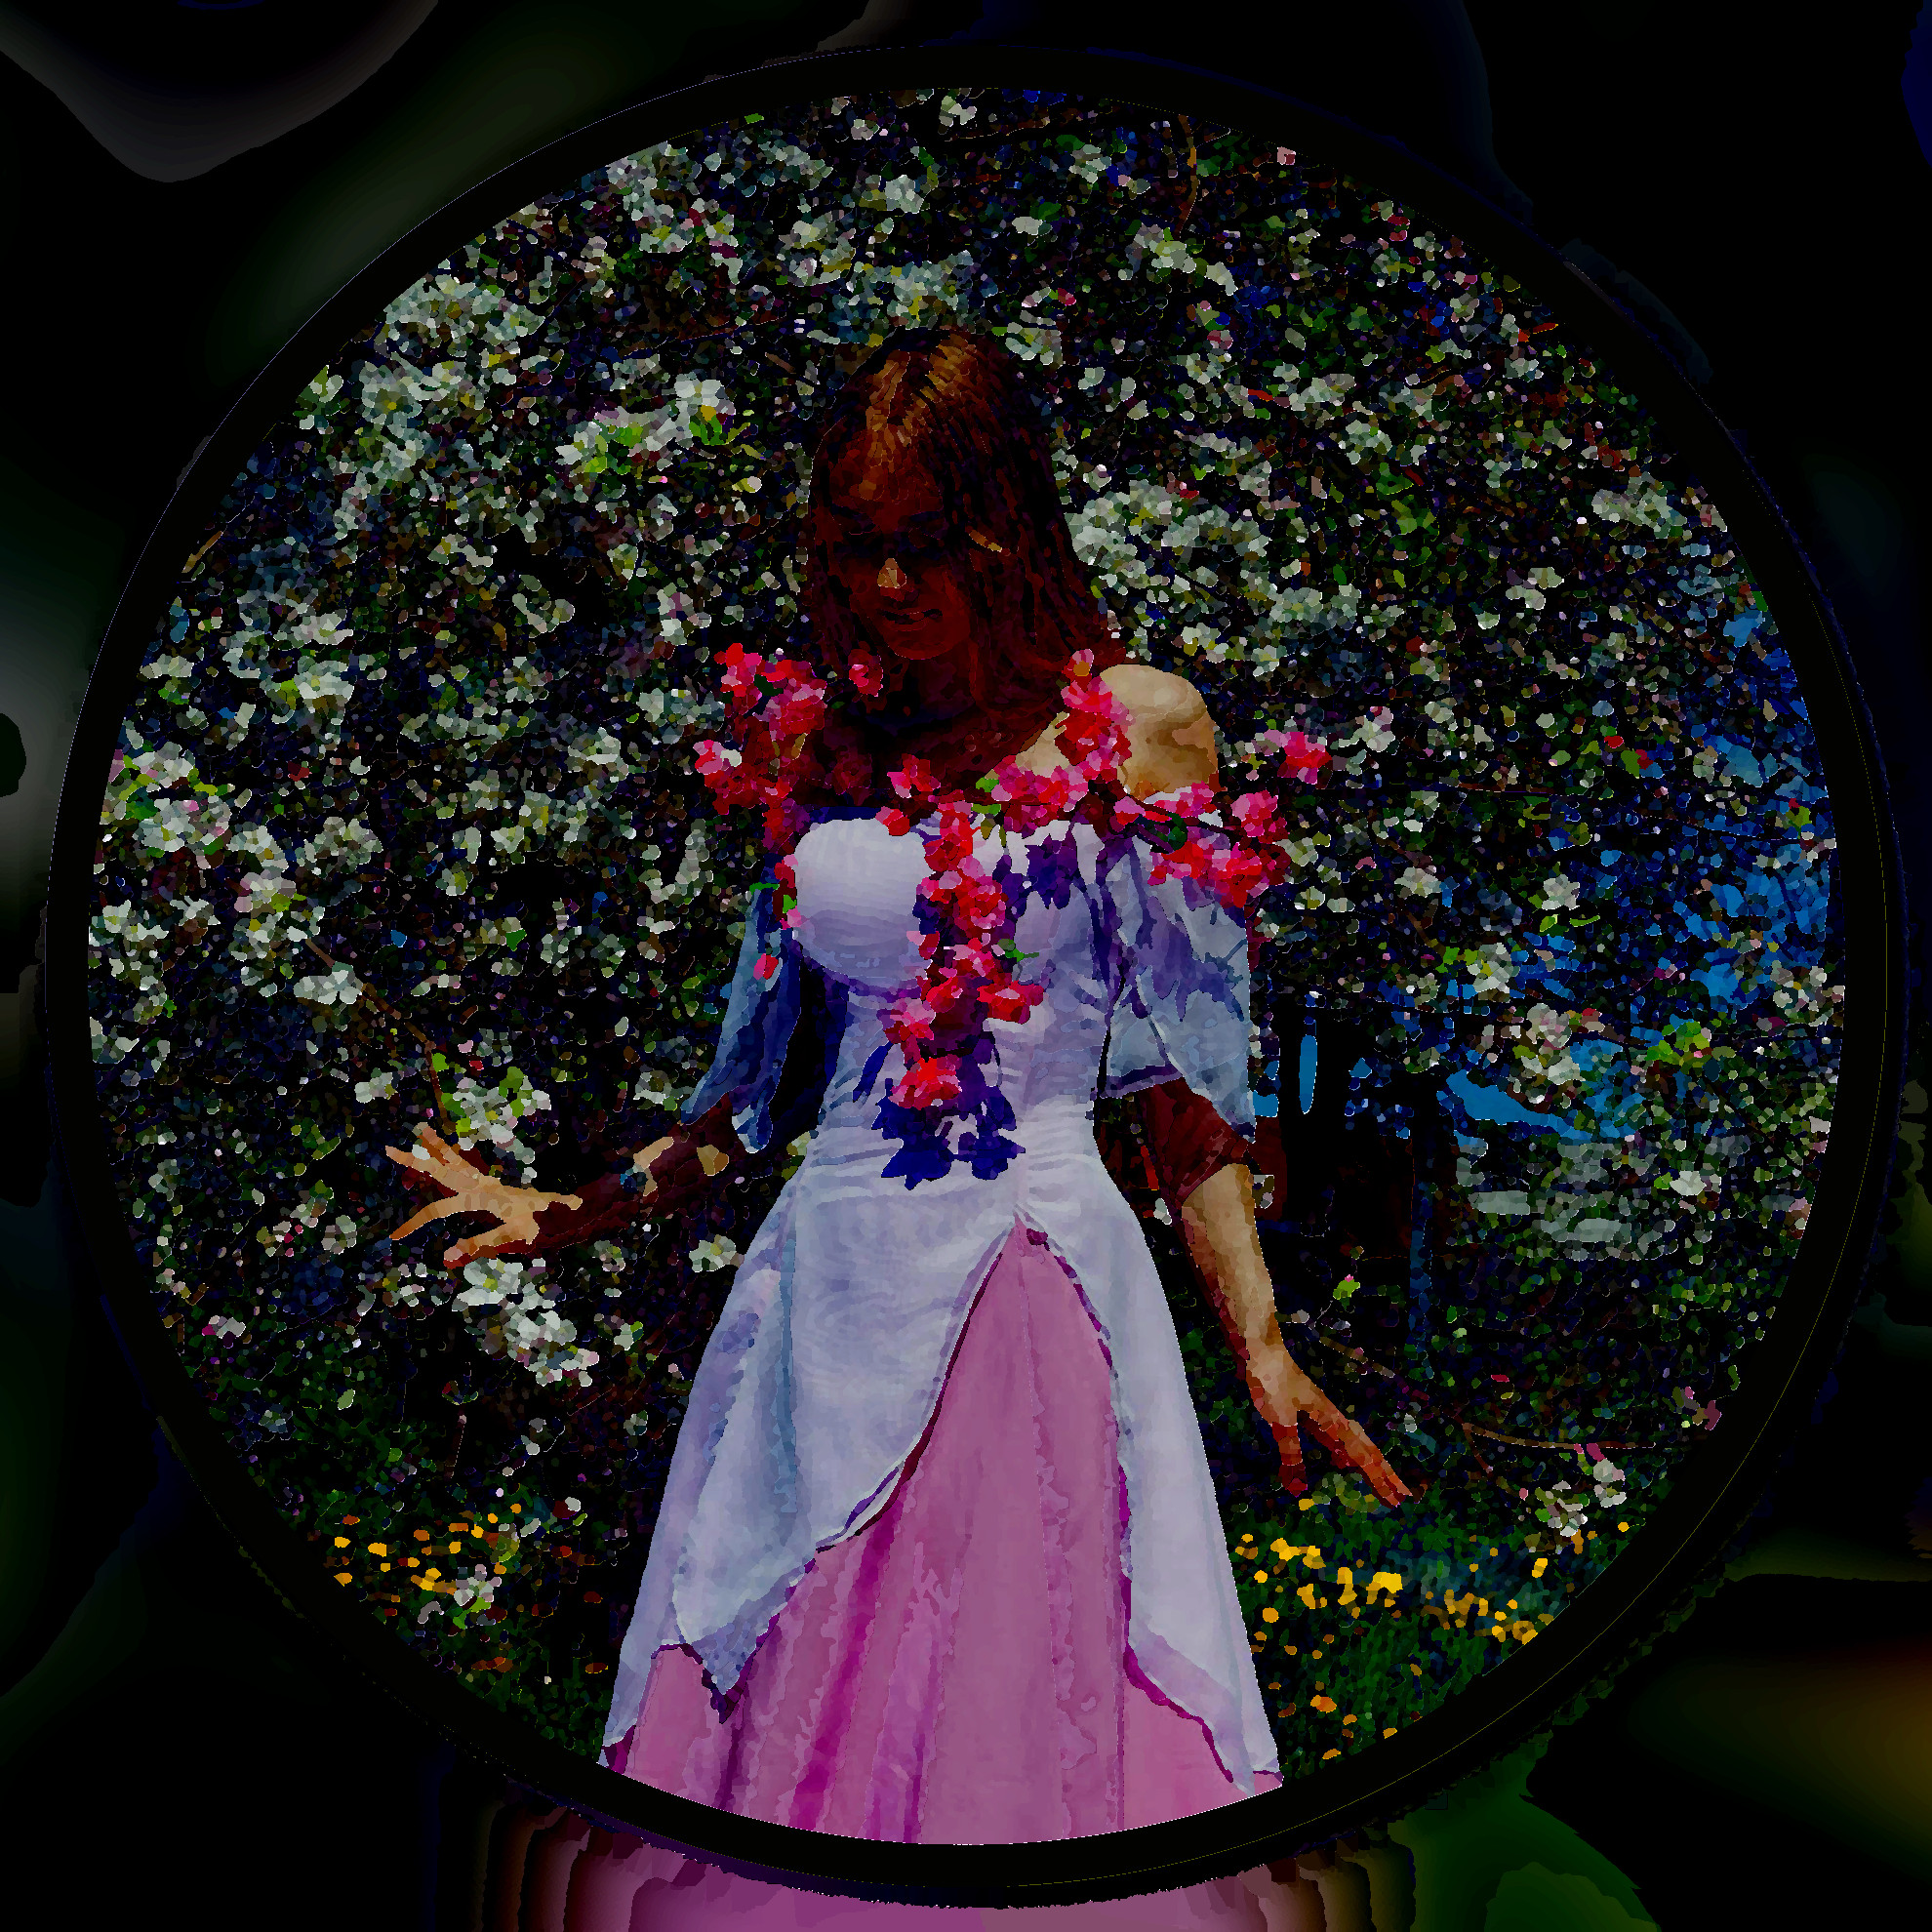 2023-05-26 08-26-12costume__blossom__by_aquilina108_dbla3uv-fullview_portrait with a framed Artistic effect, style Cutout.jpg